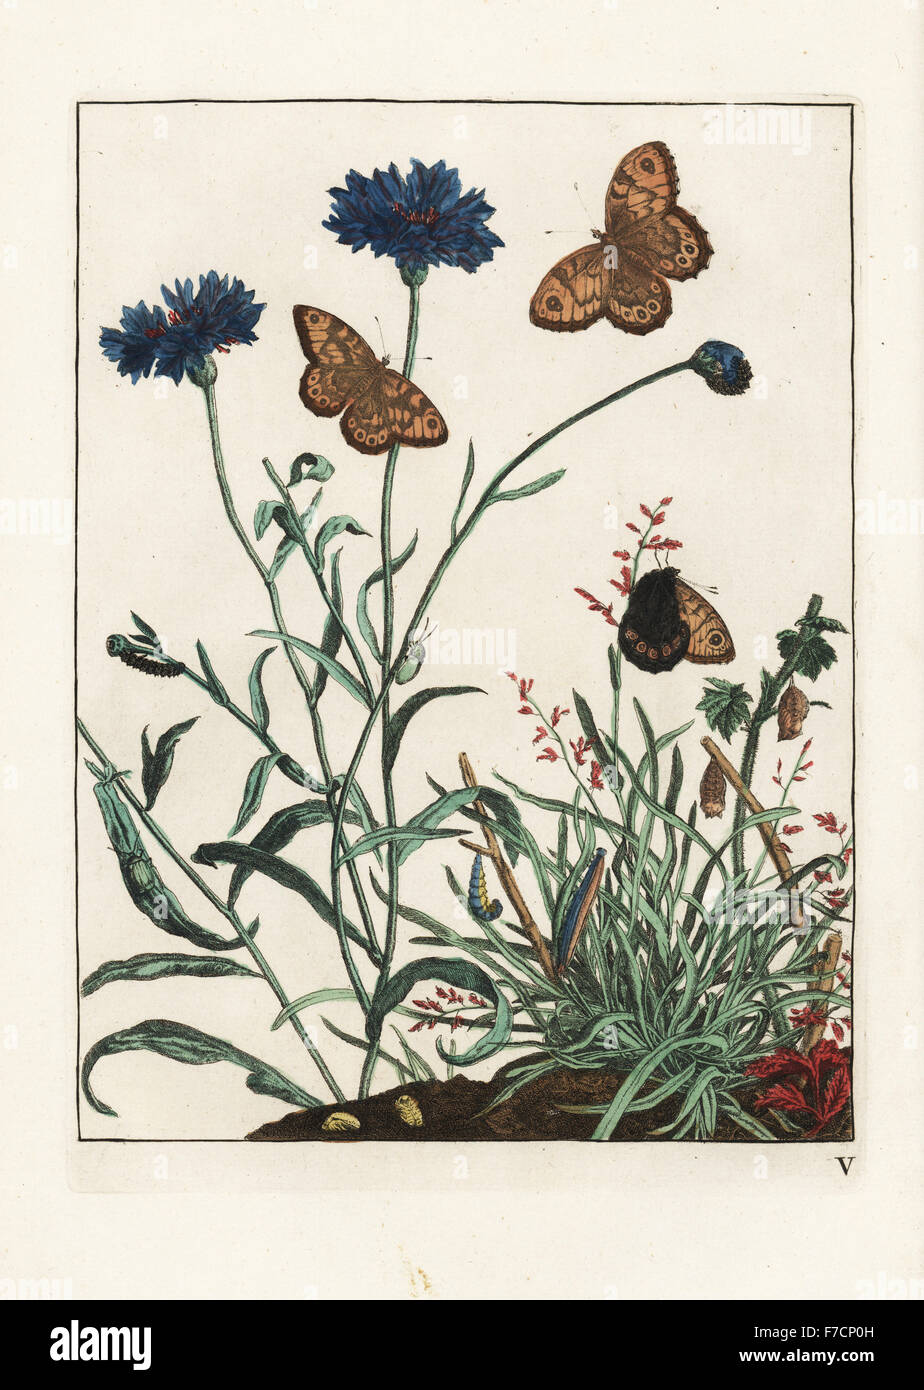 Wall butterfly, Lasiommata megera, larva and pupa on cornflower, Centaurea cyanus. Handcoloured copperplate engraving drawn and etched by Jacob l'Admiral in Naauwkeurige Waarneemingen omtrent de veranderingen van veele Insekten (Accurate Descriptions of the Metamorphoses of Insects), J. Sluyter, Amsterdam, 1774. For this second edition, M. Houttuyn added another eight plates to the original 25. Stock Photo